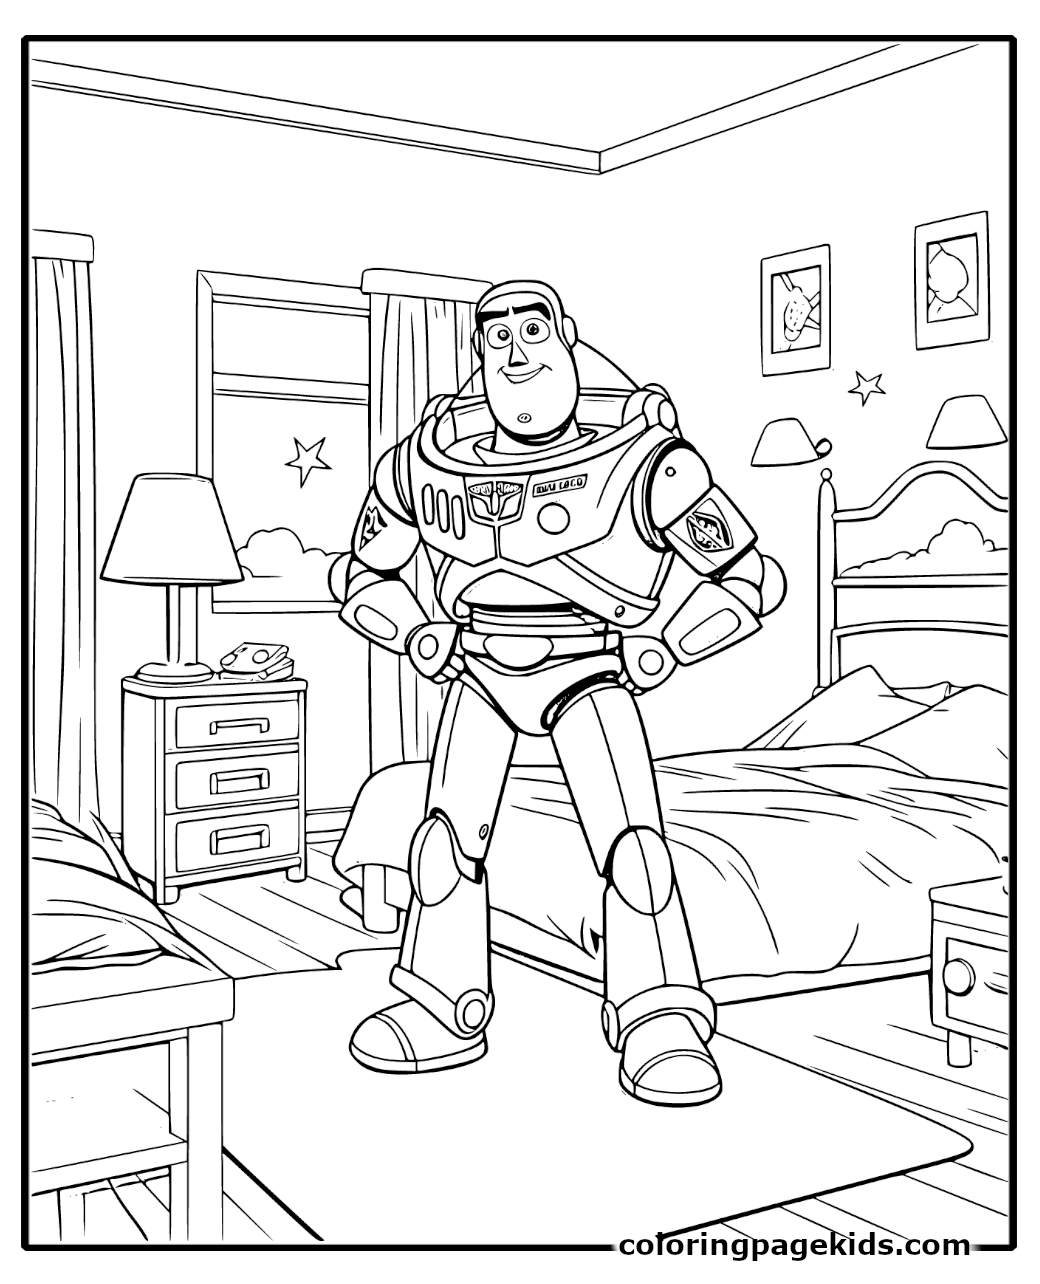 16 Free Printable Buzz Lightyear Coloring Pages For Kids